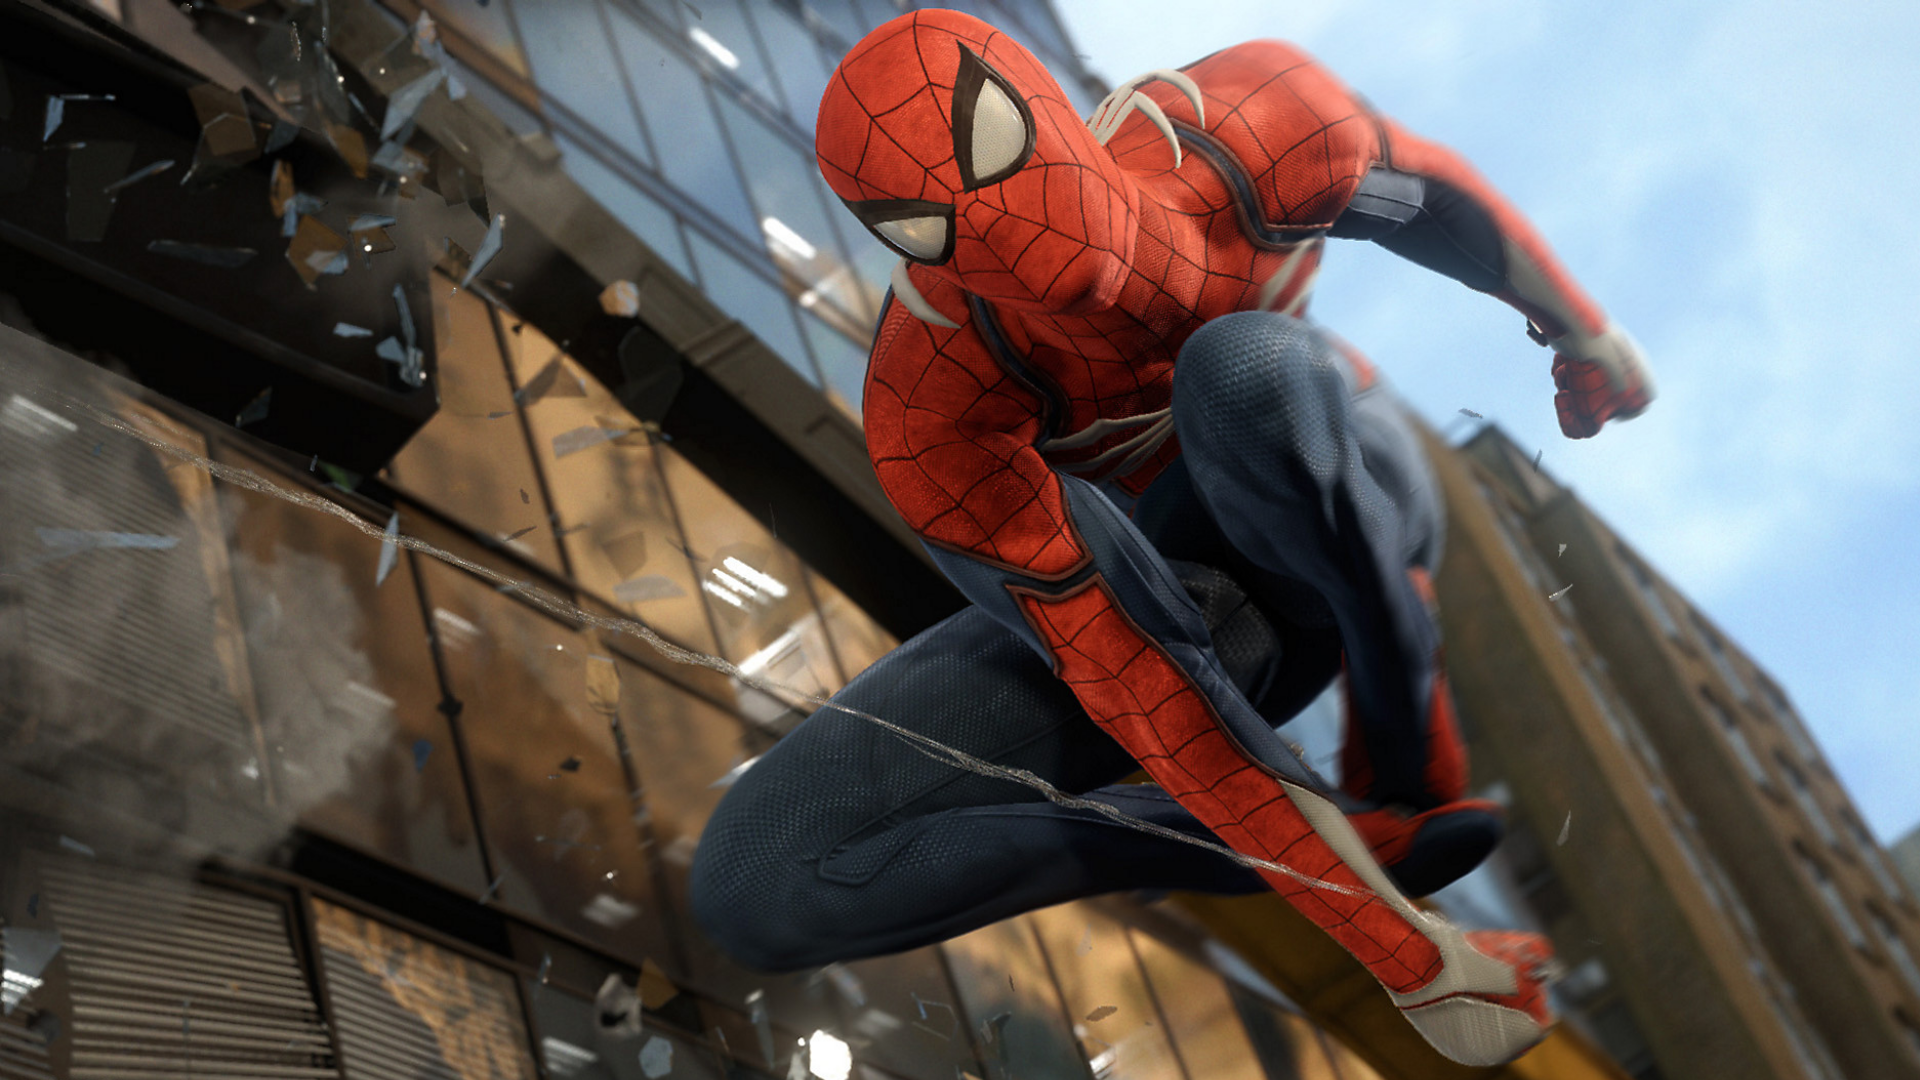 The best games like Spider-Man you can play on PC